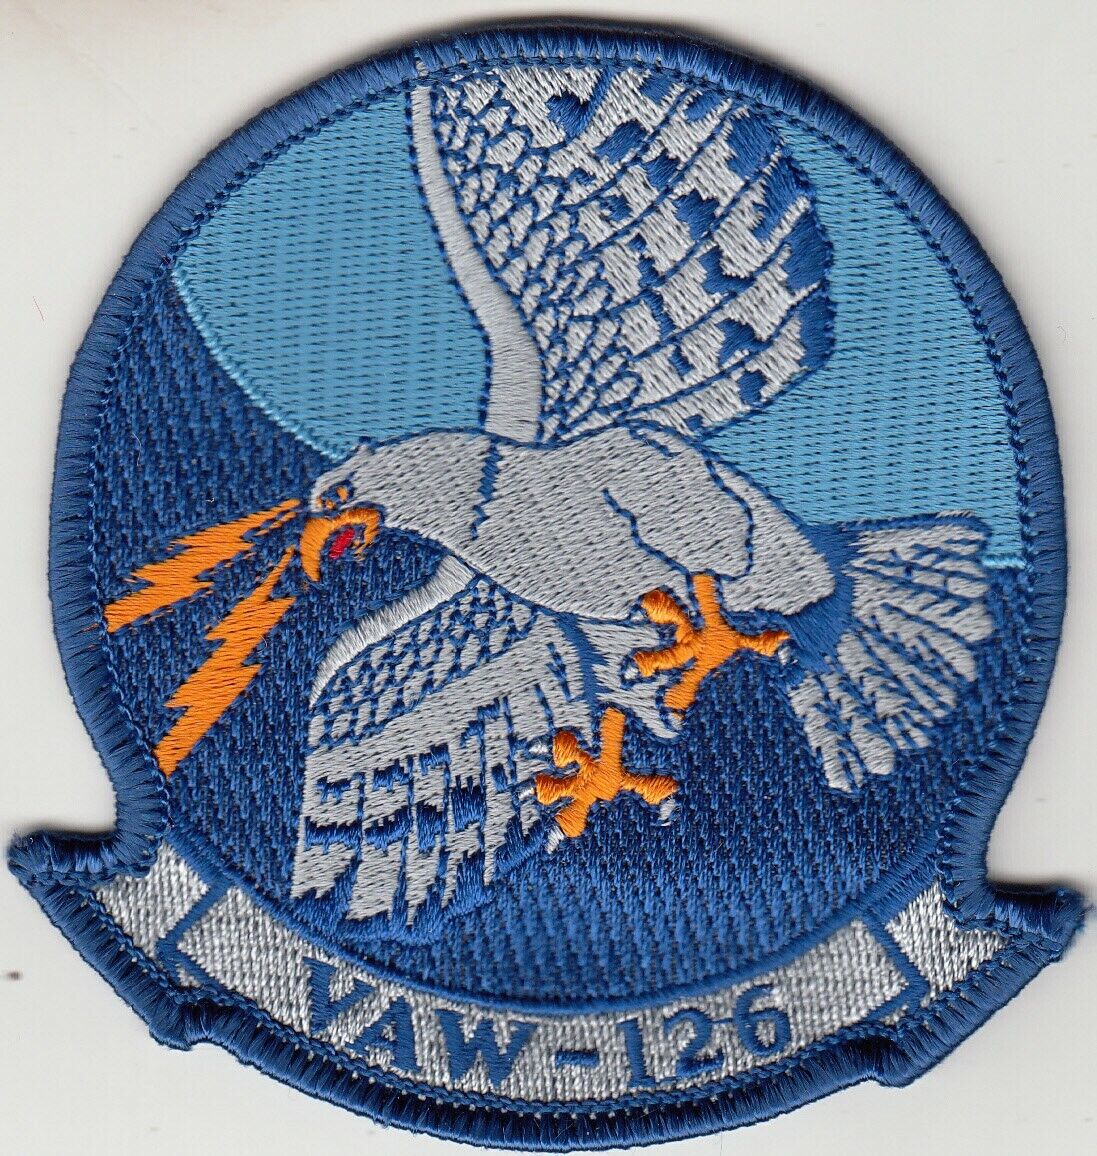 VAW-126 SEAHAWKS COMMAND CHEST PATCH [Item 126007]